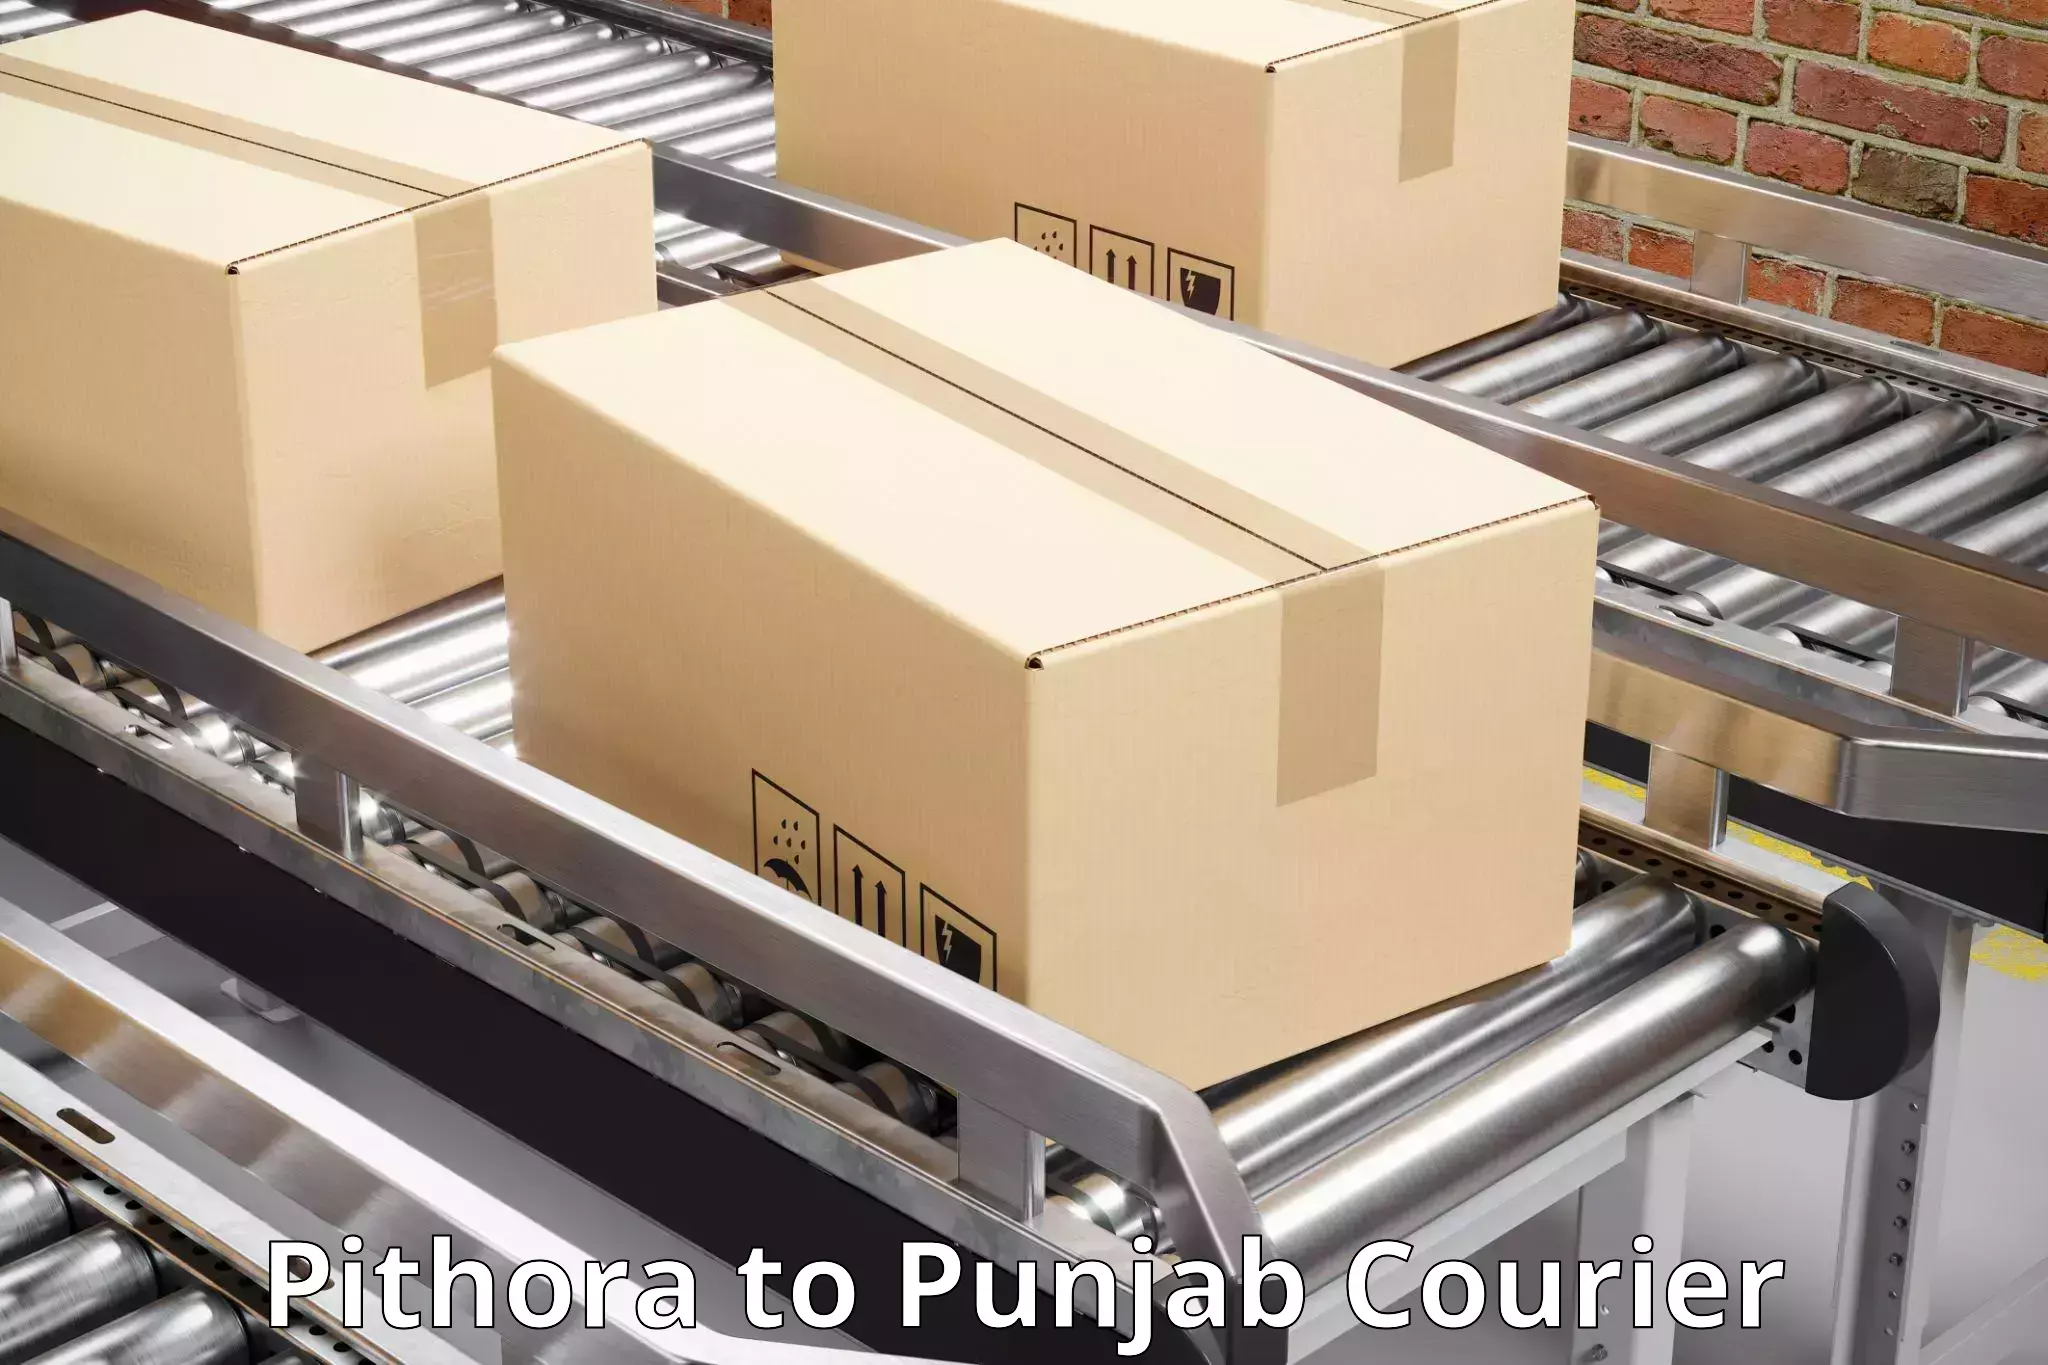 Courier service comparison Pithora to Pathankot